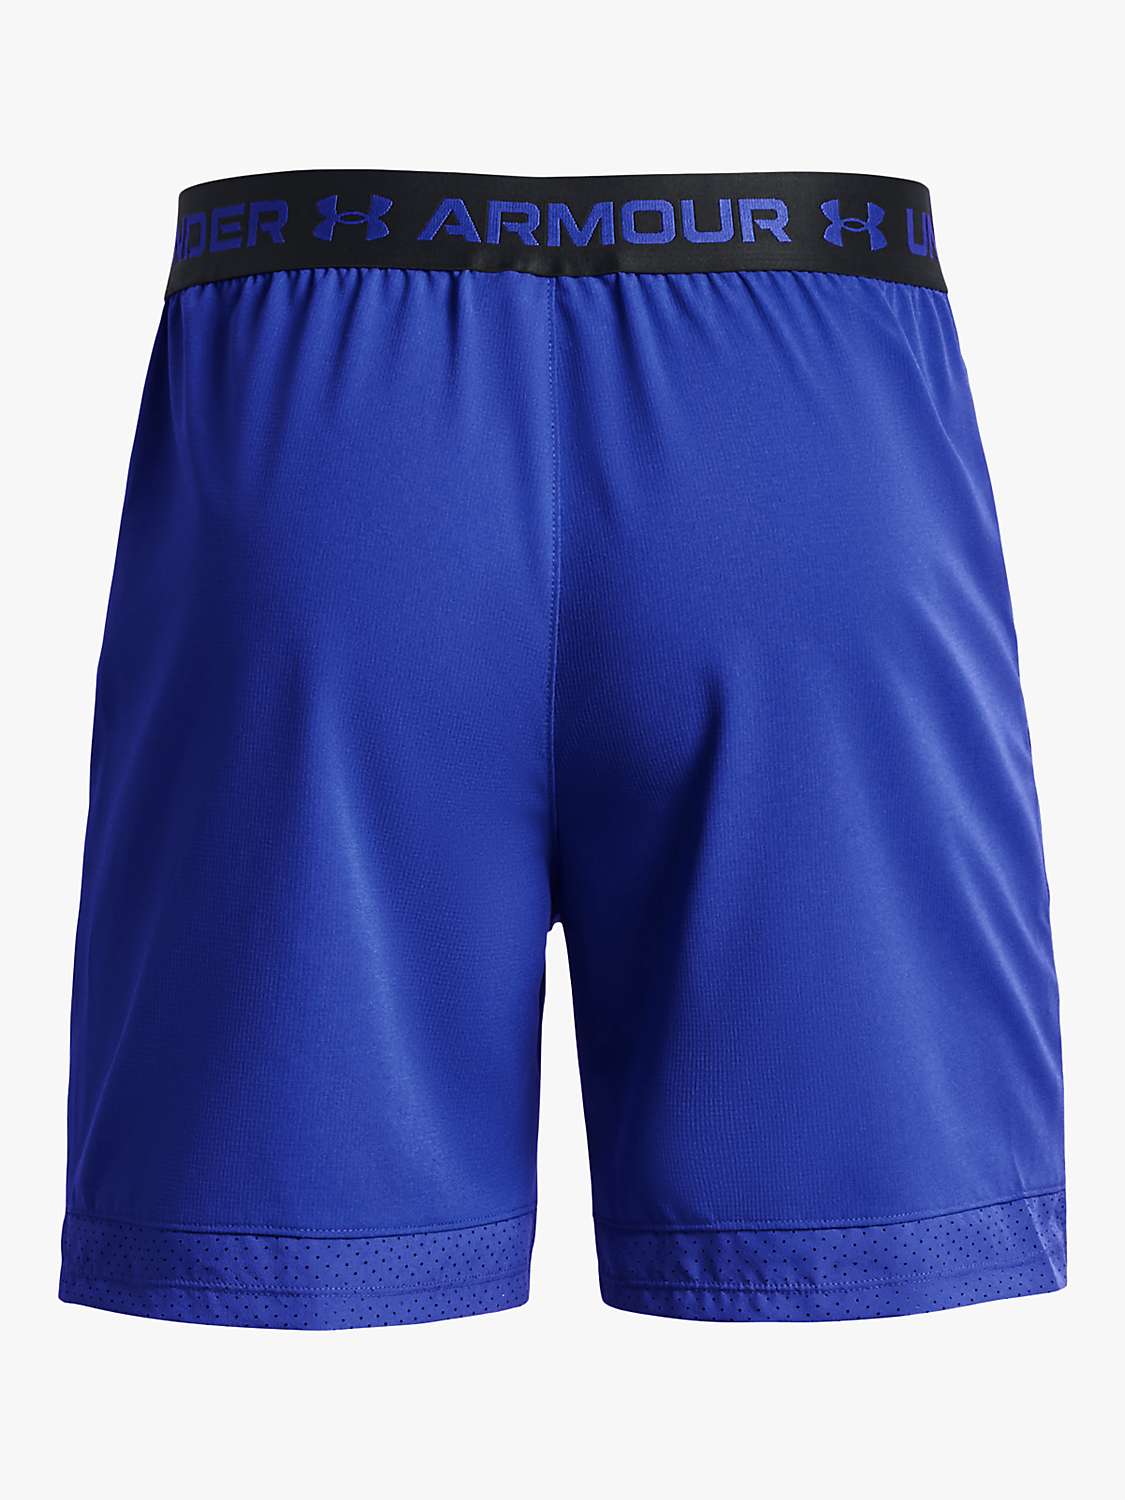 Buy Under Armour Vanish Woven 6" Gym Shorts Online at johnlewis.com